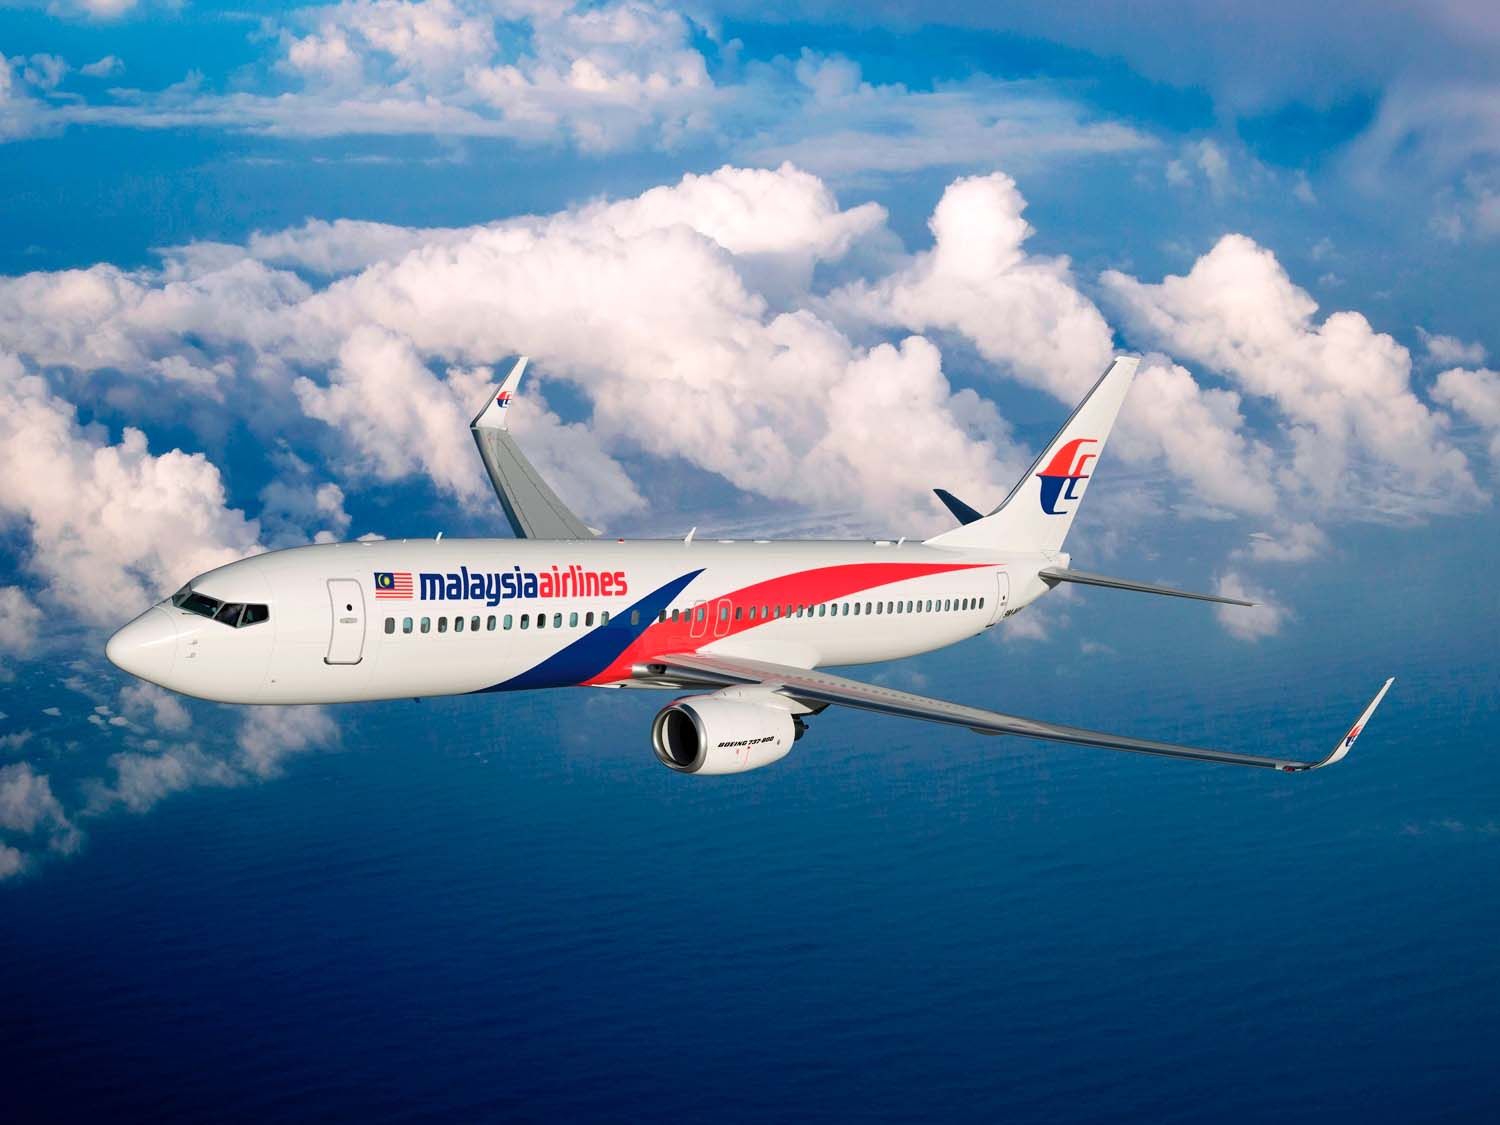 Malaysia Airlines HD Wallpaper. Malaysia airlines, Malaysian